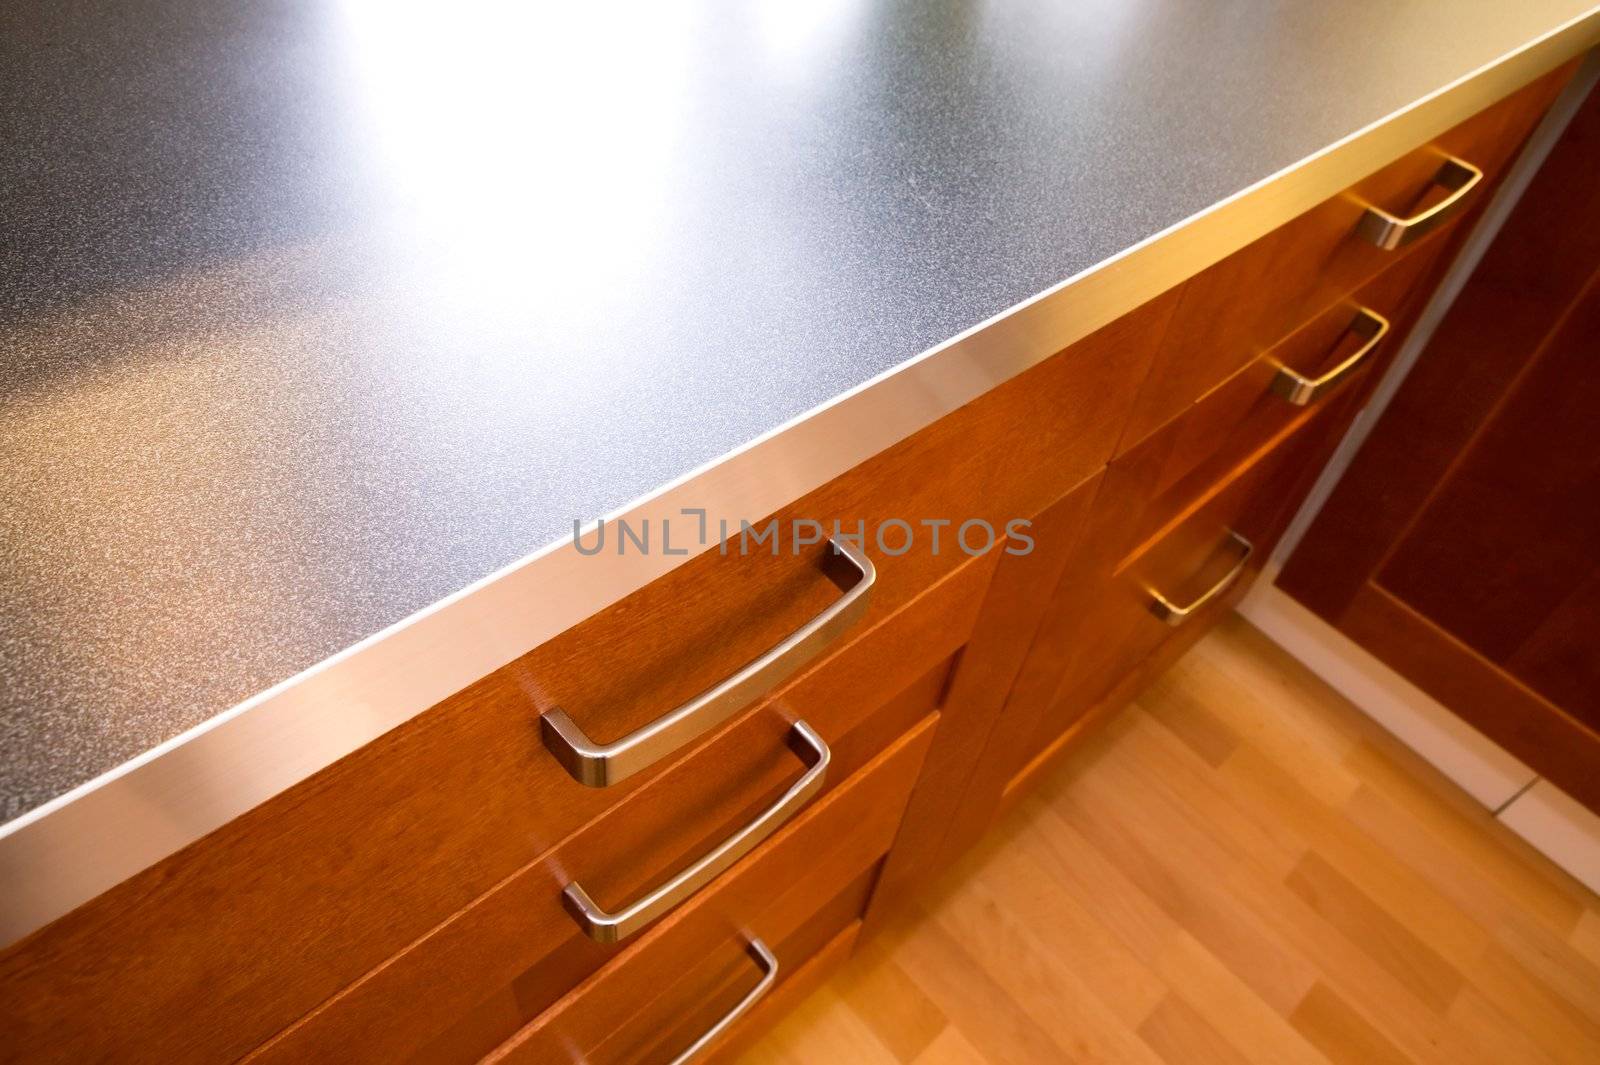 A detail close up image of a stylish kitchen counter and drawer.